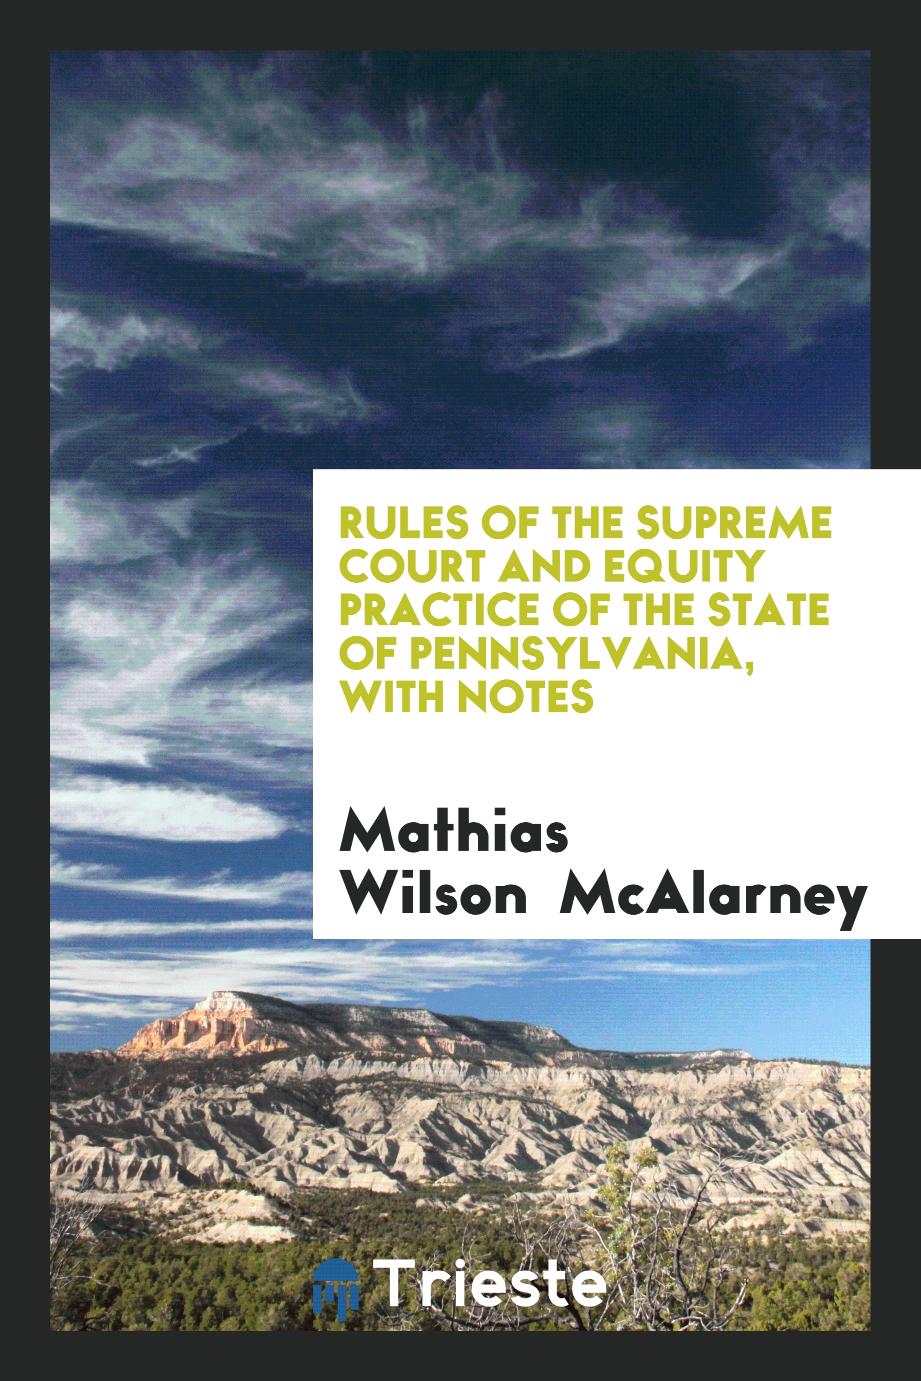 Rules of the Supreme Court and Equity Practice of the State of Pennsylvania, with Notes